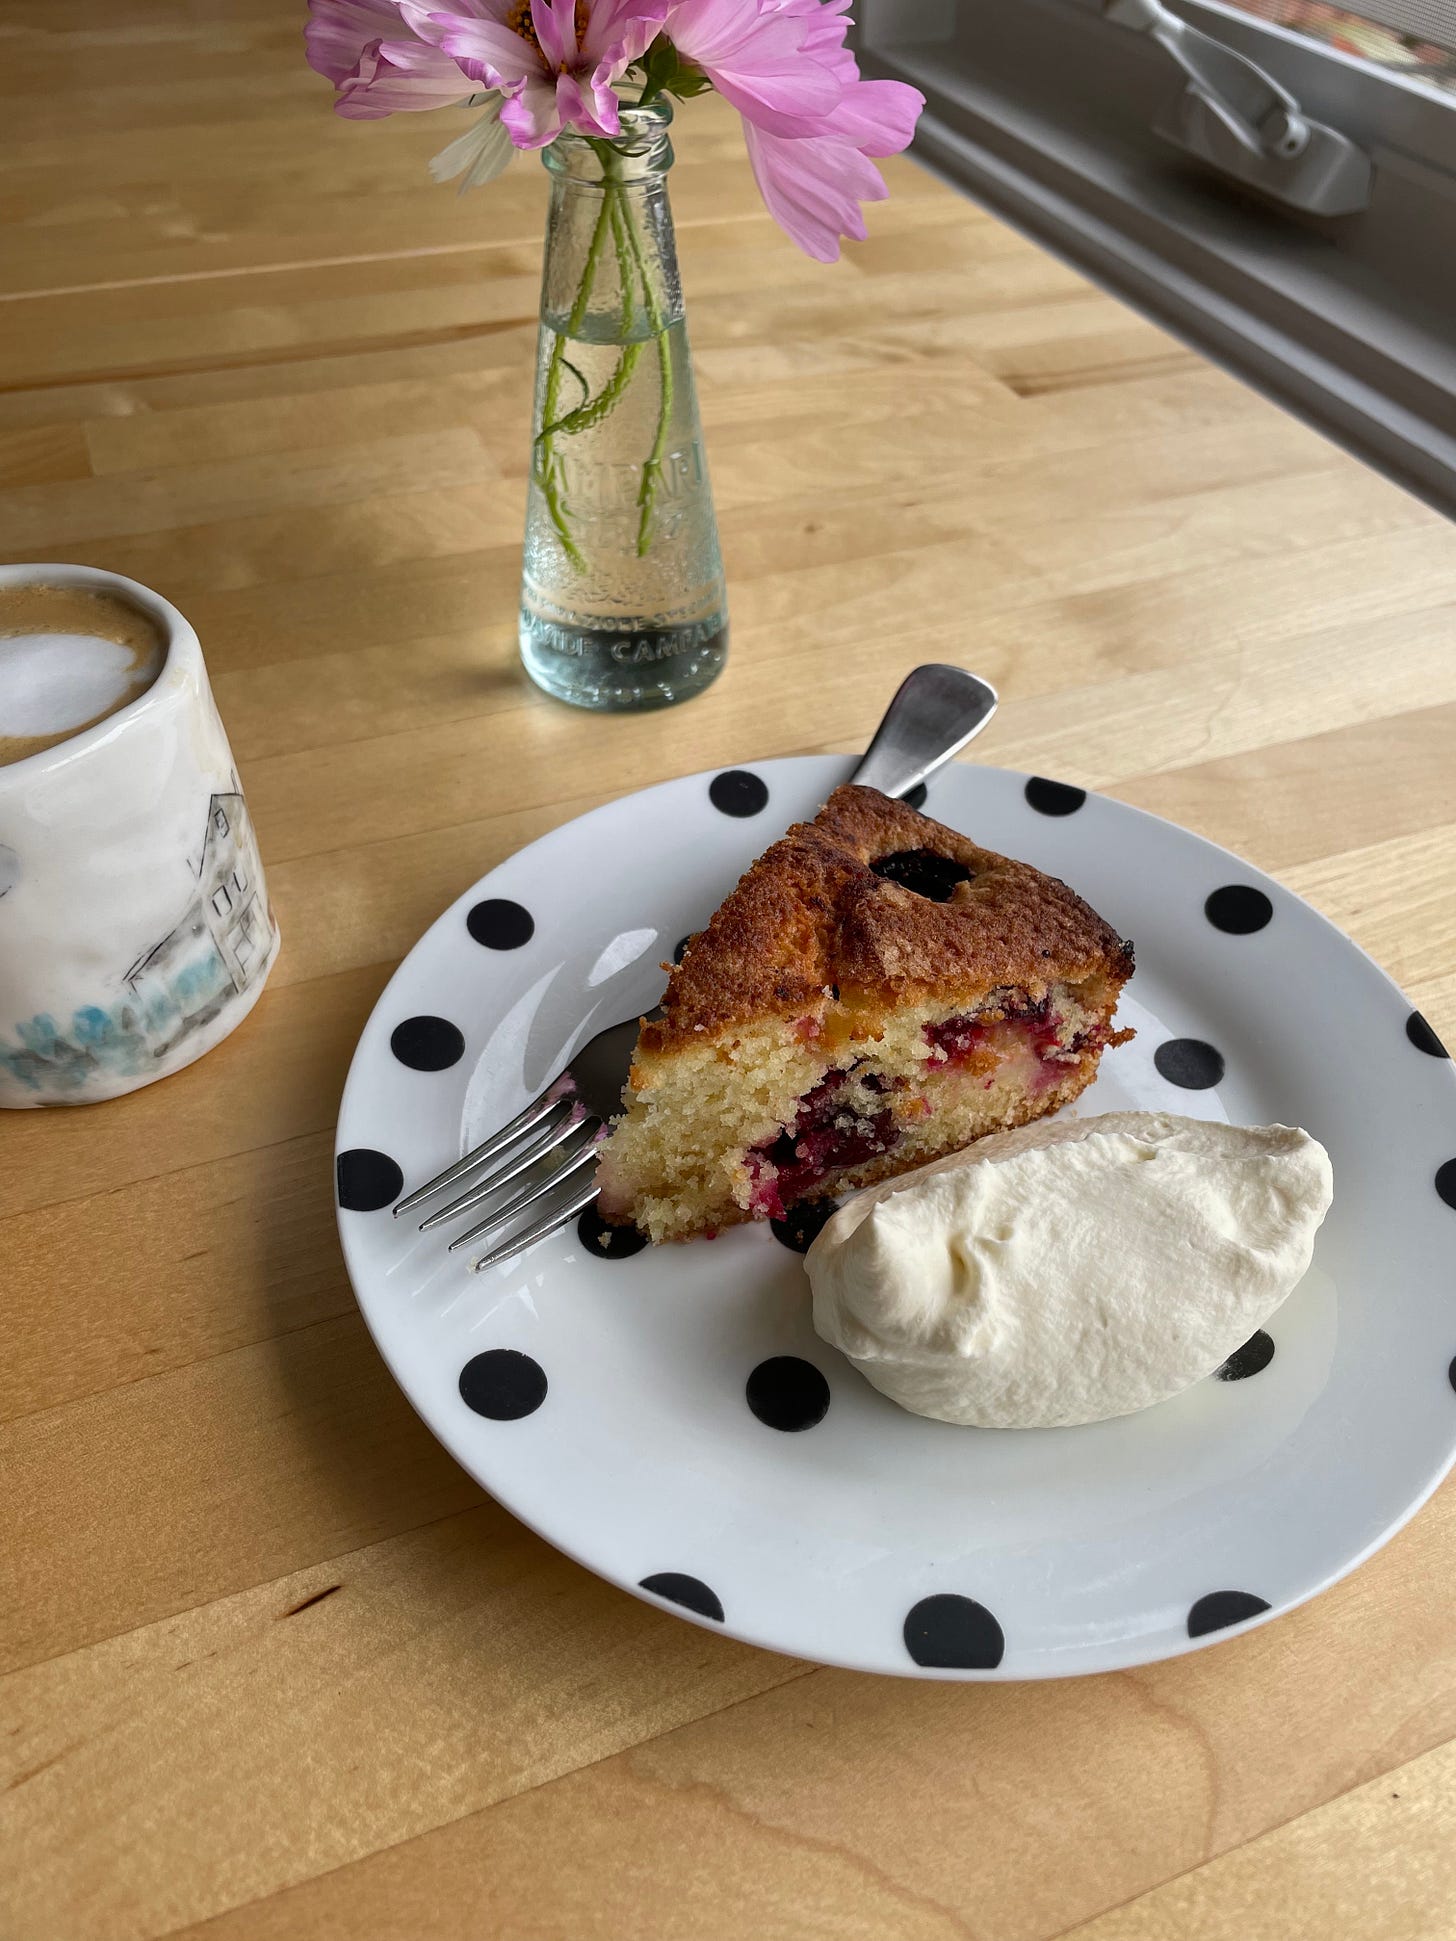 Slice of butter cake with sunken plums on a spotty plate, with whipped cream served alongside. A small flat white and vase of flowers are also on the blonde wood dining table.